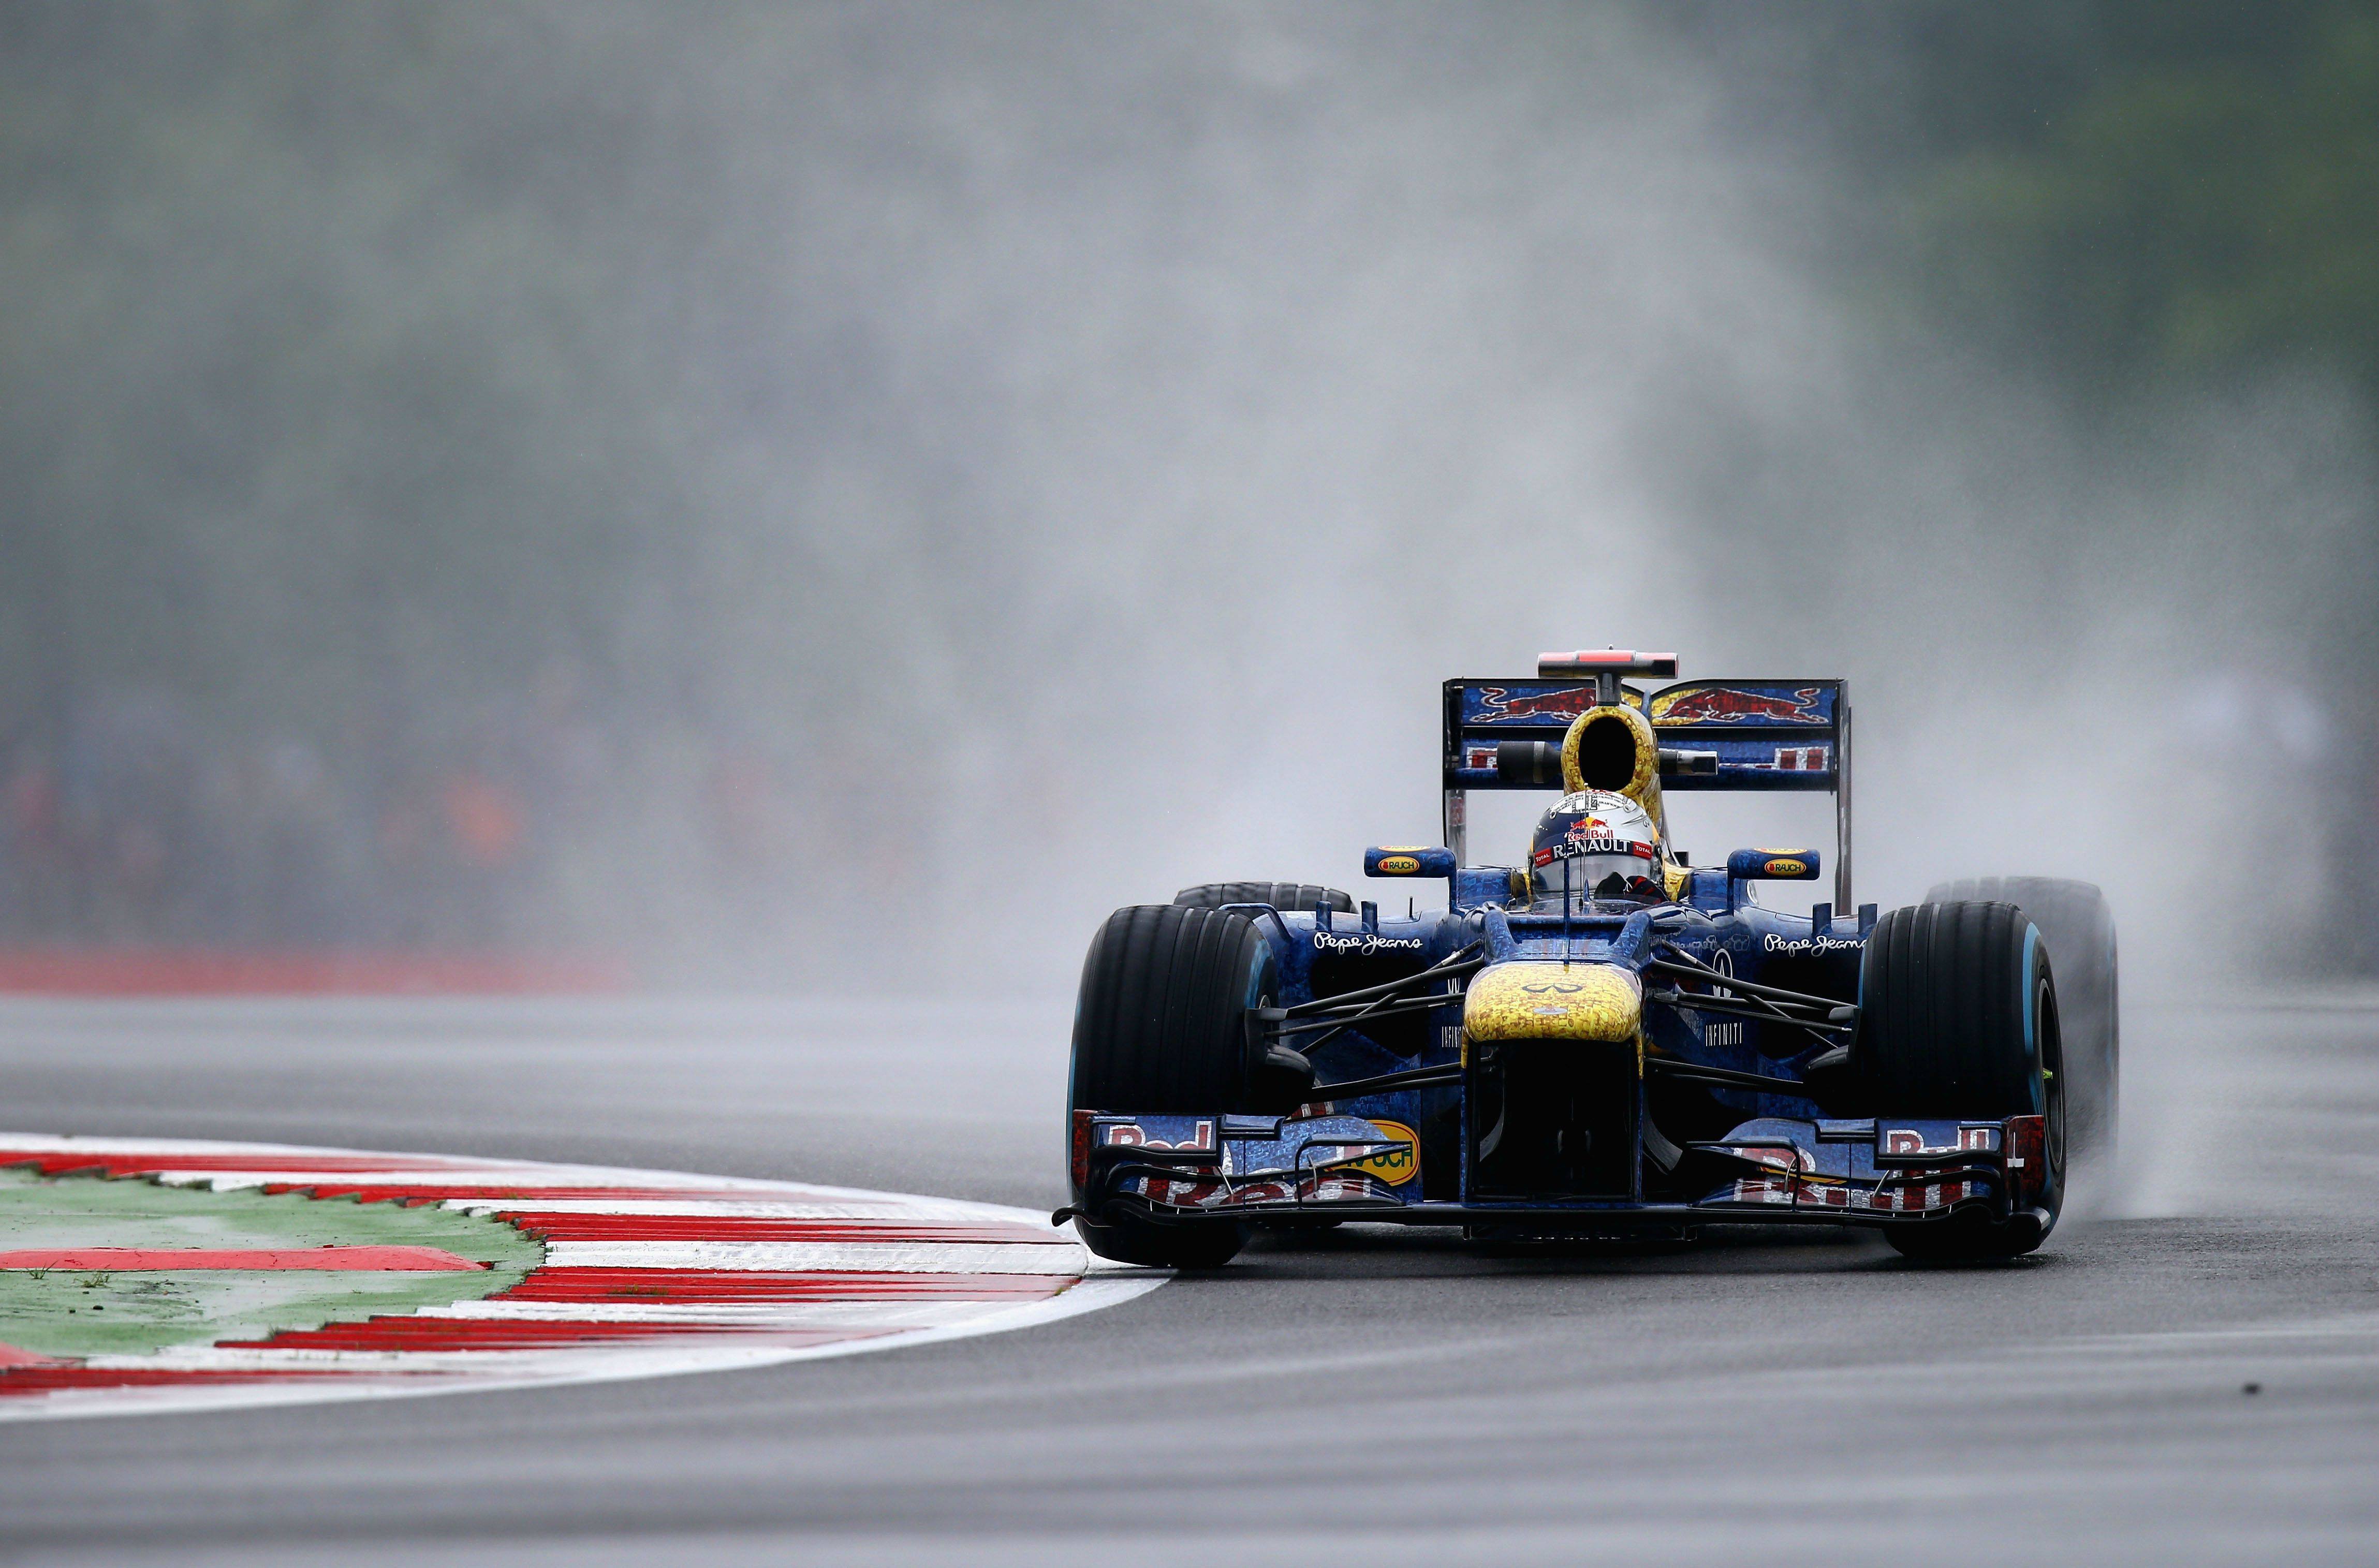 Red Bull Racing Rb8 Wallpapers